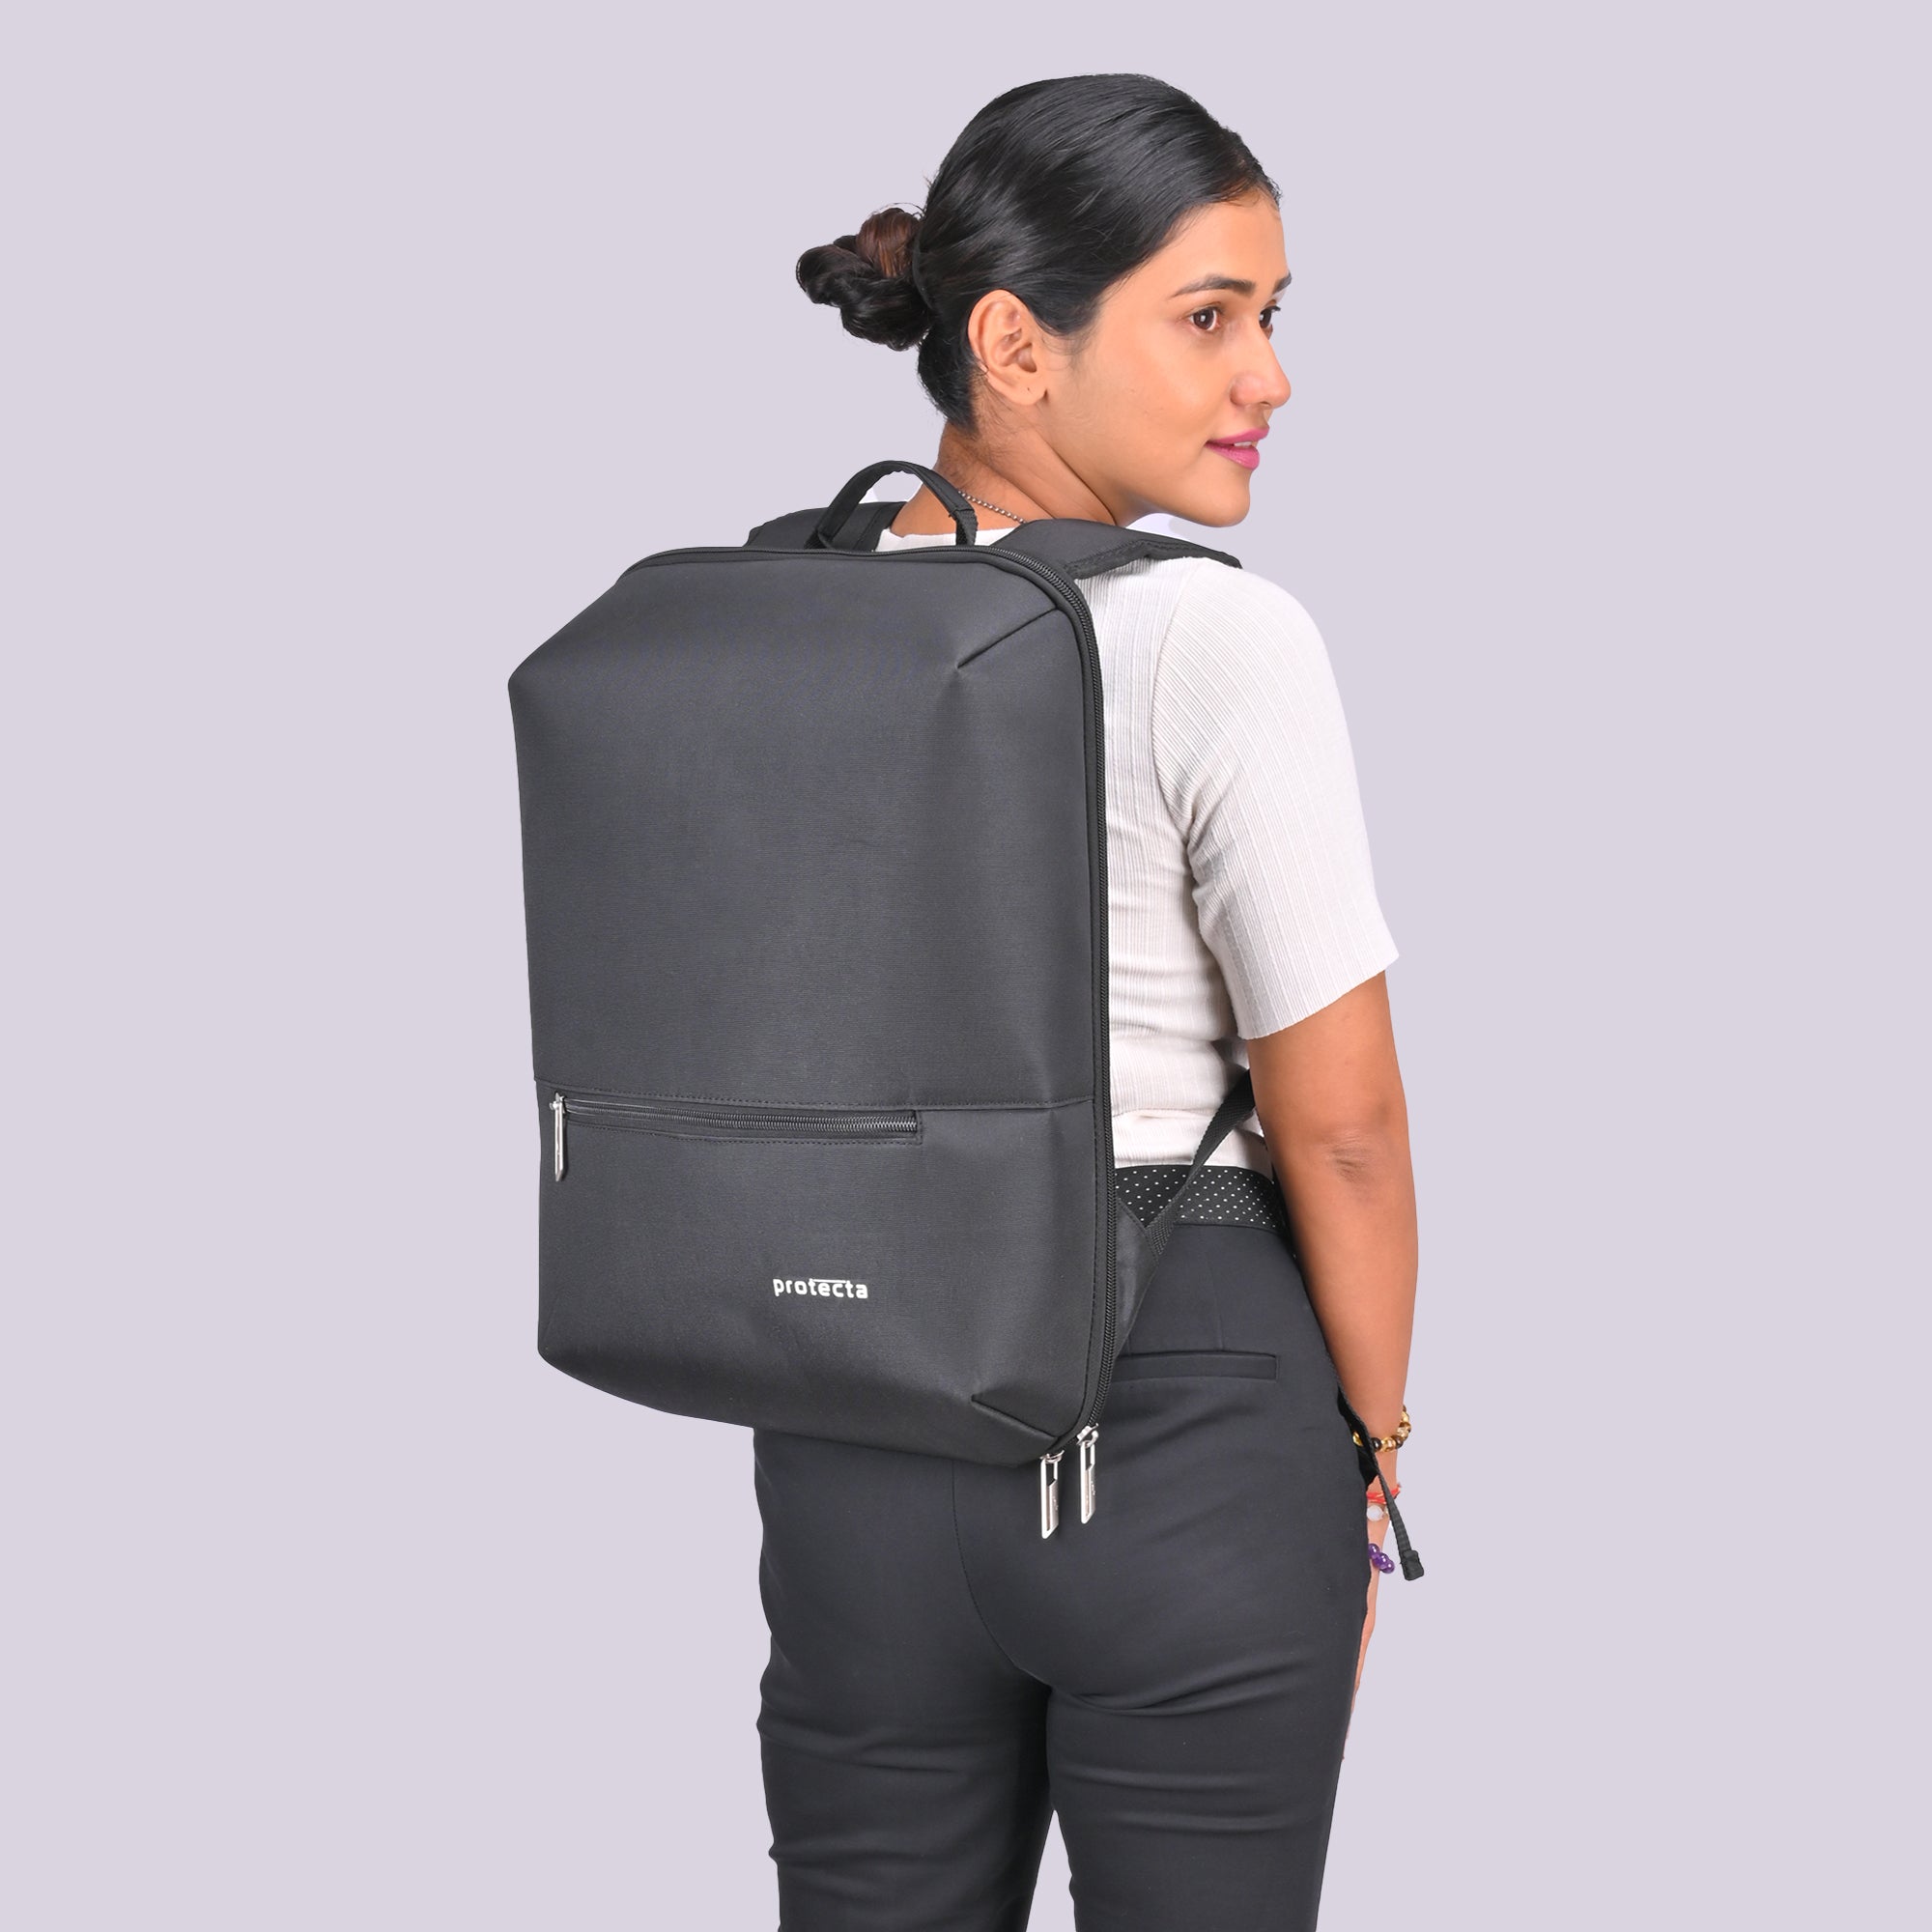 Black | Protecta Quest Anti-Theft Office Laptop Backpack - 3